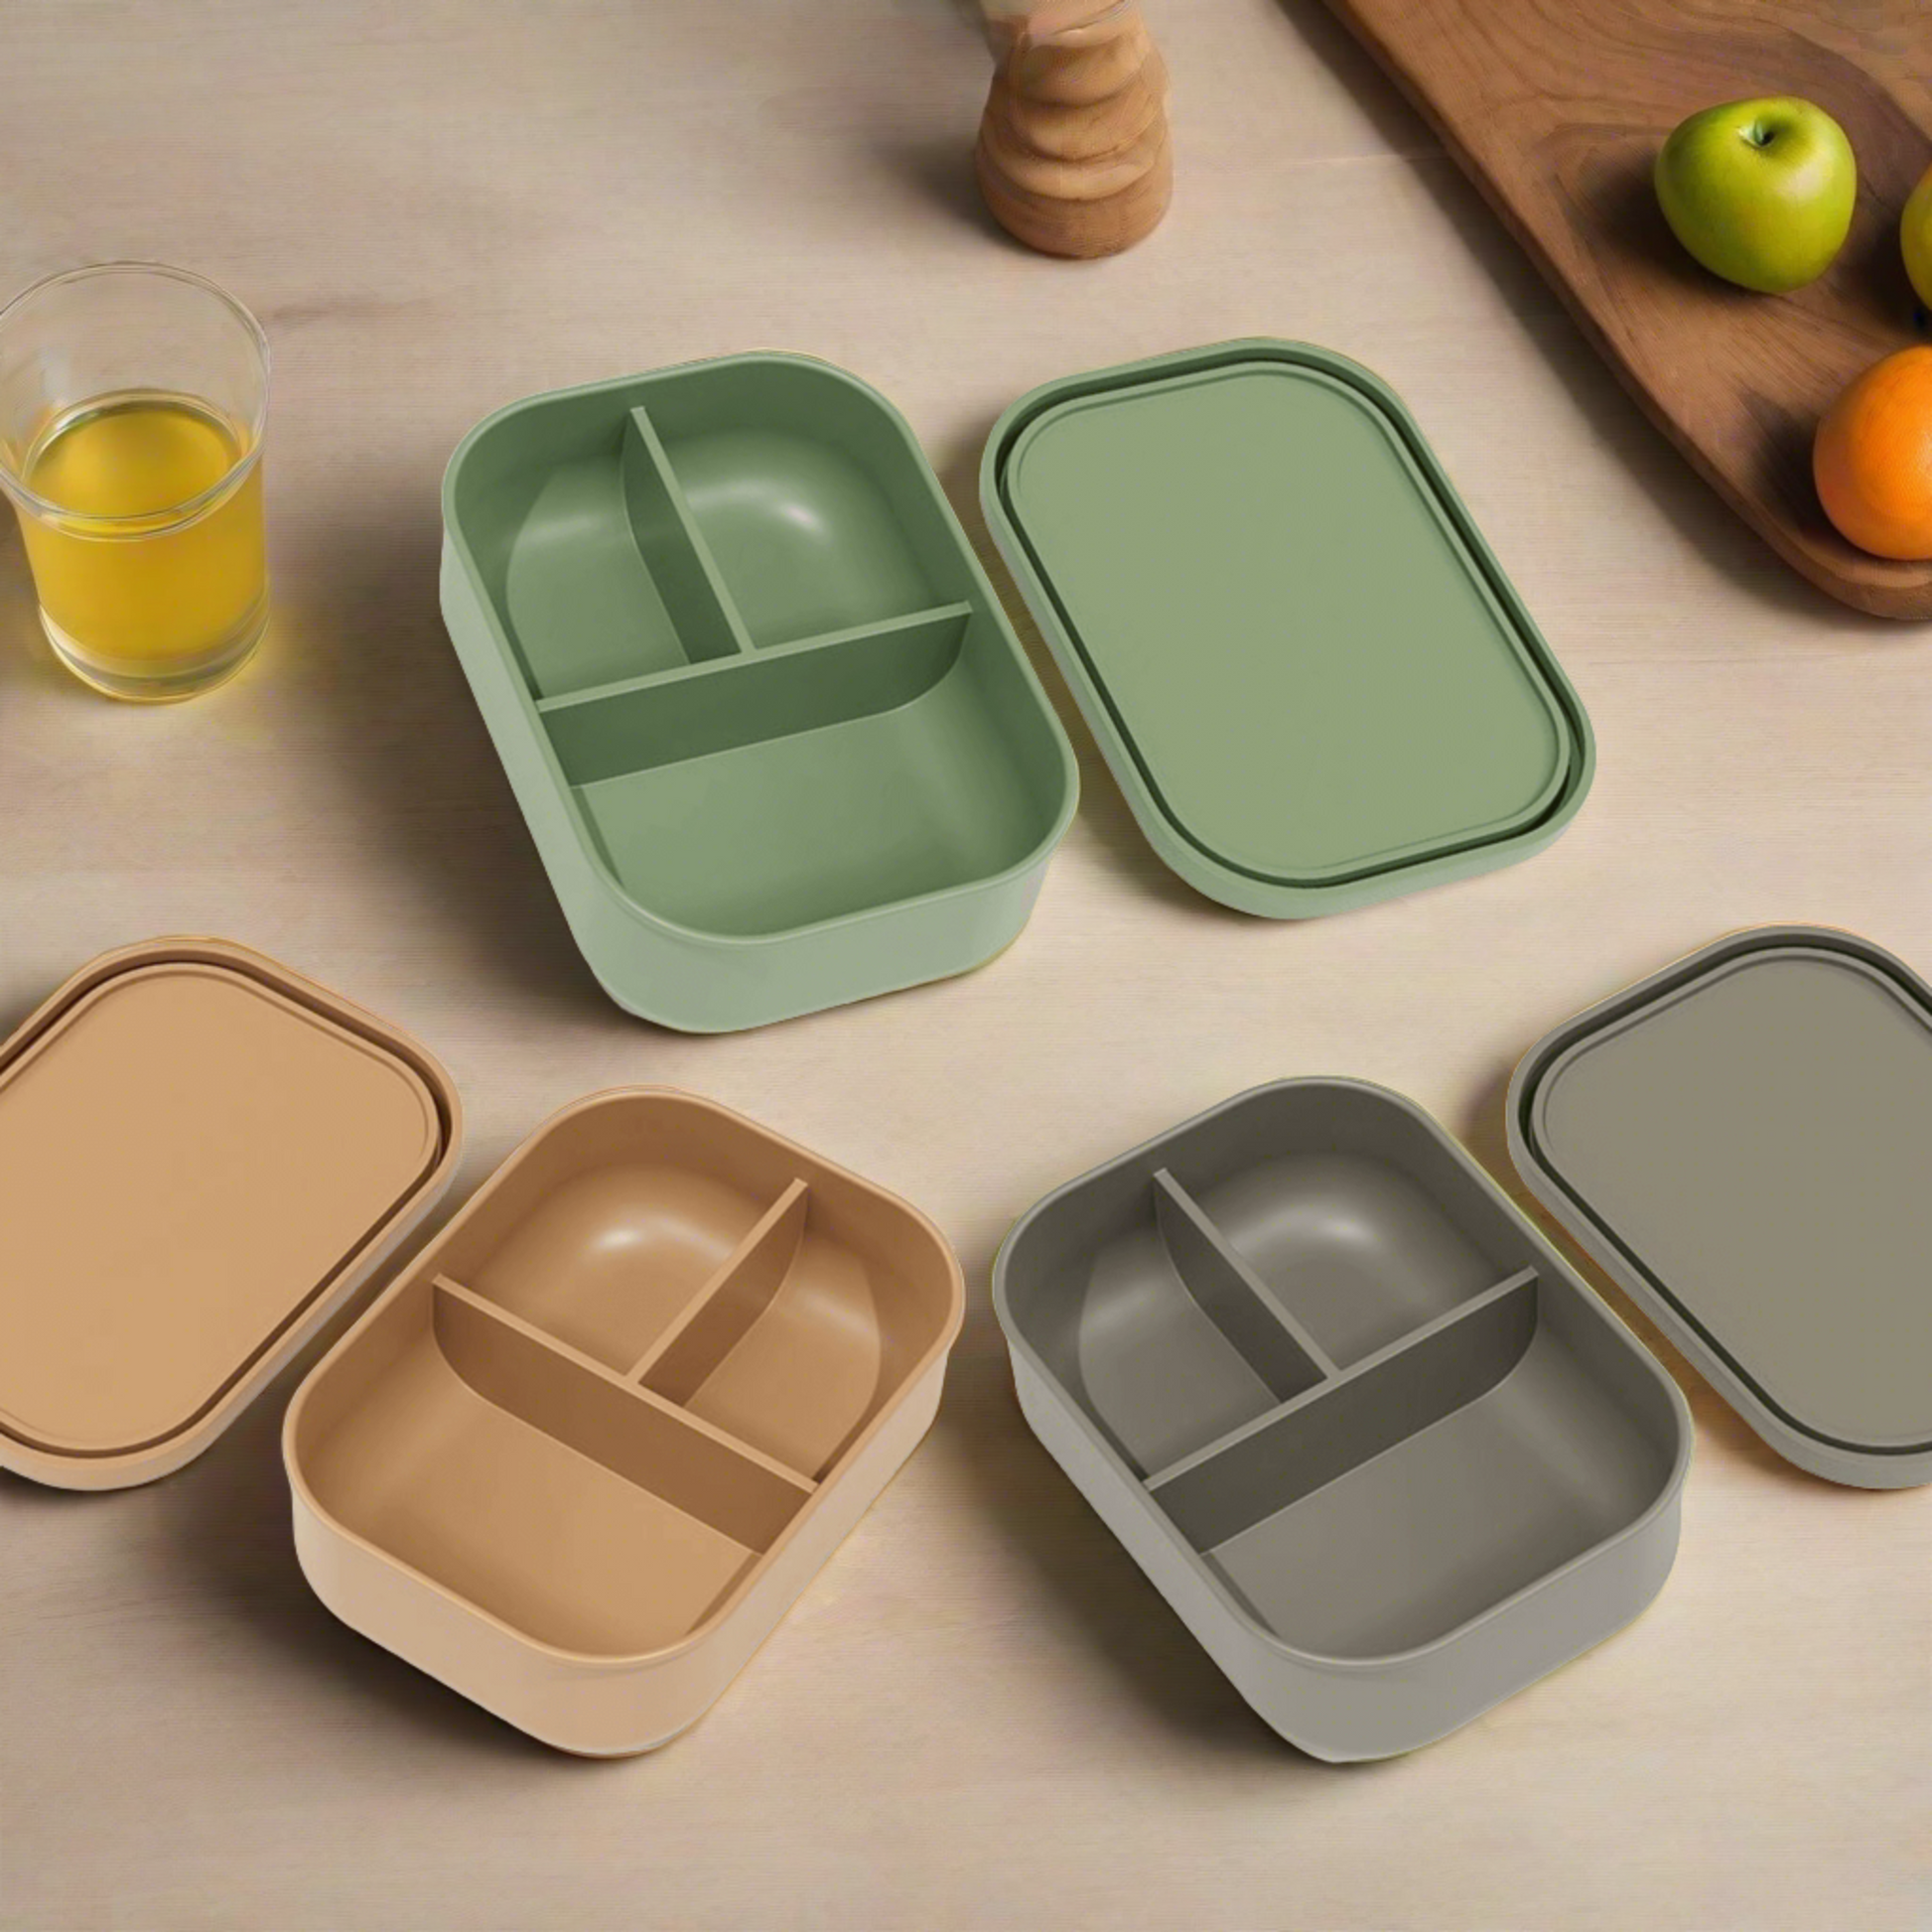 Full collection of 'Silicone Bento Lunch Box | 3x Compartments' in sage green, warm taupe, and  light grey.